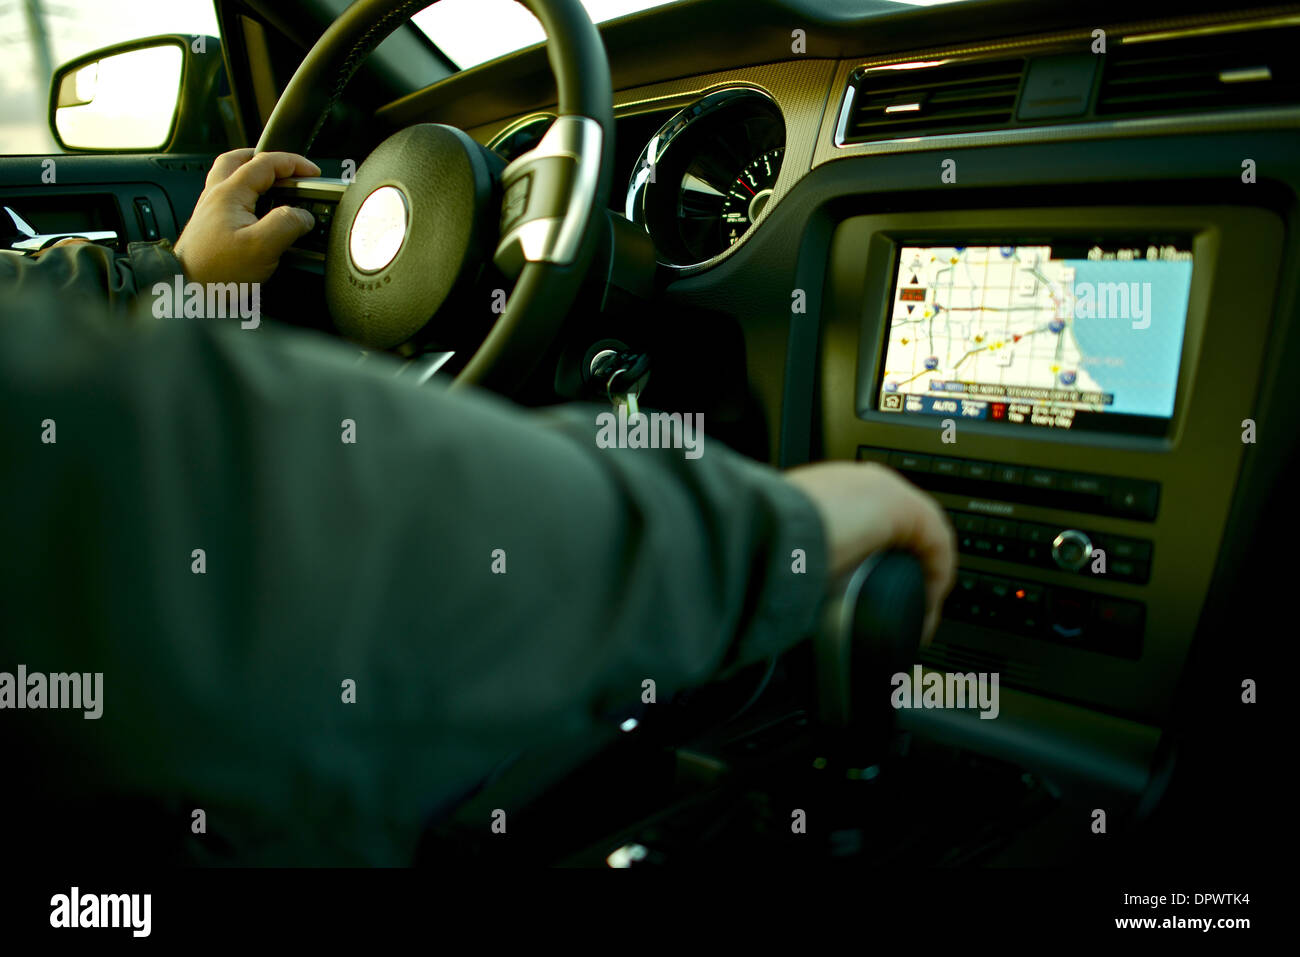 Car Navigation - Driving a Car with Navigation and Multimedia System. Car Interior with Male Driver. Transportation Photo Collec Stock Photo